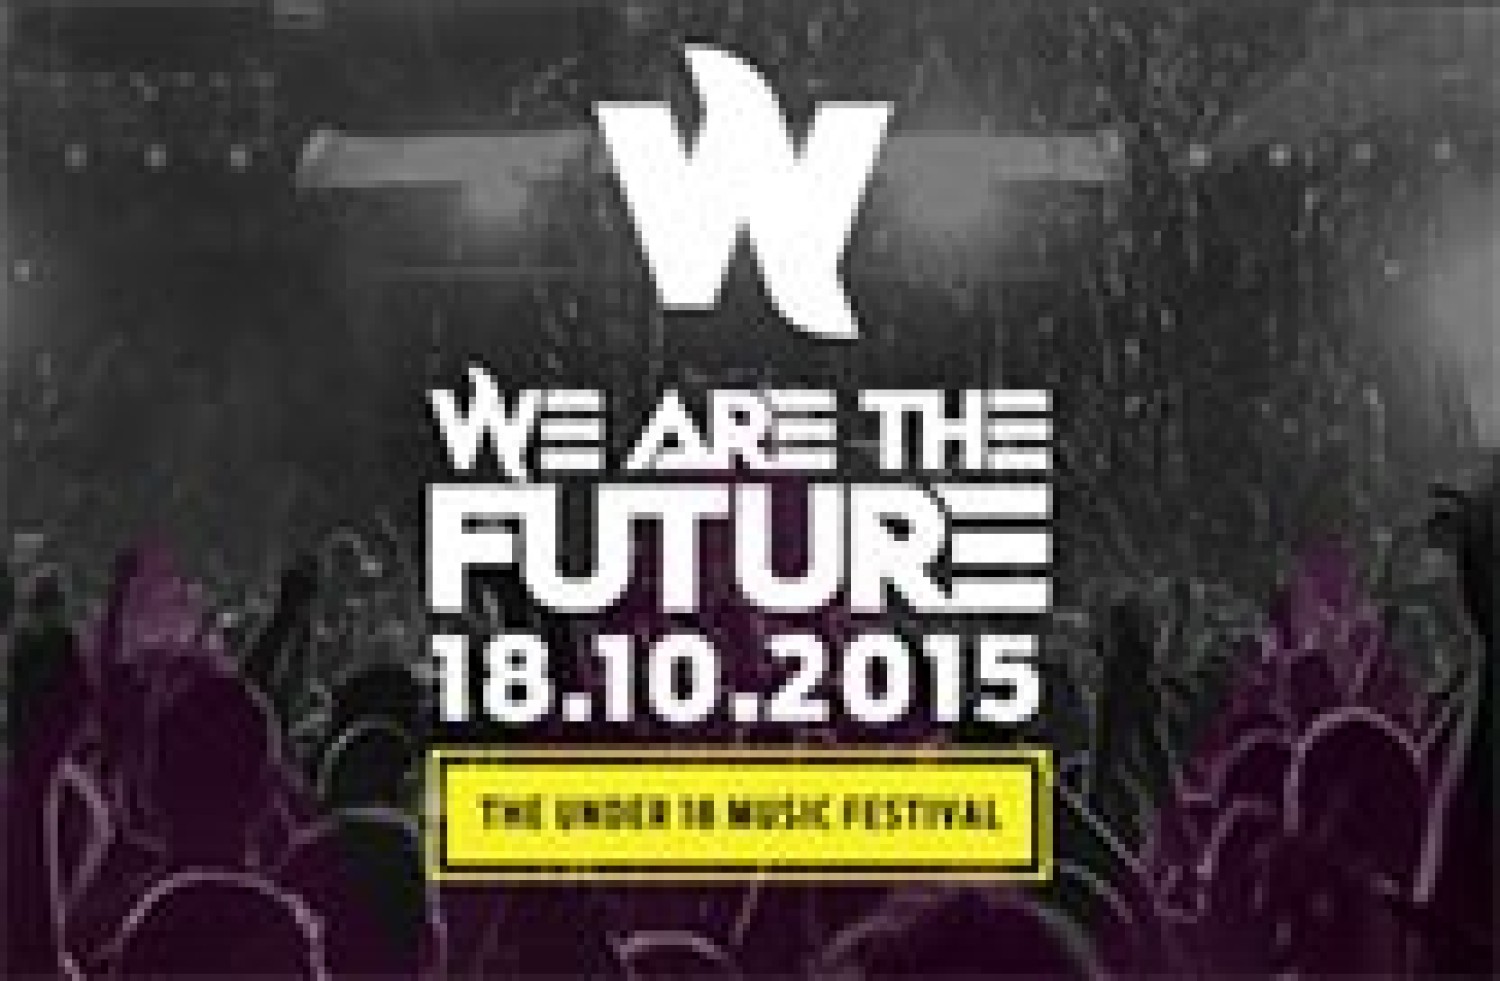 Party report: We Are The Future, Amsterdam (18-10-2015)